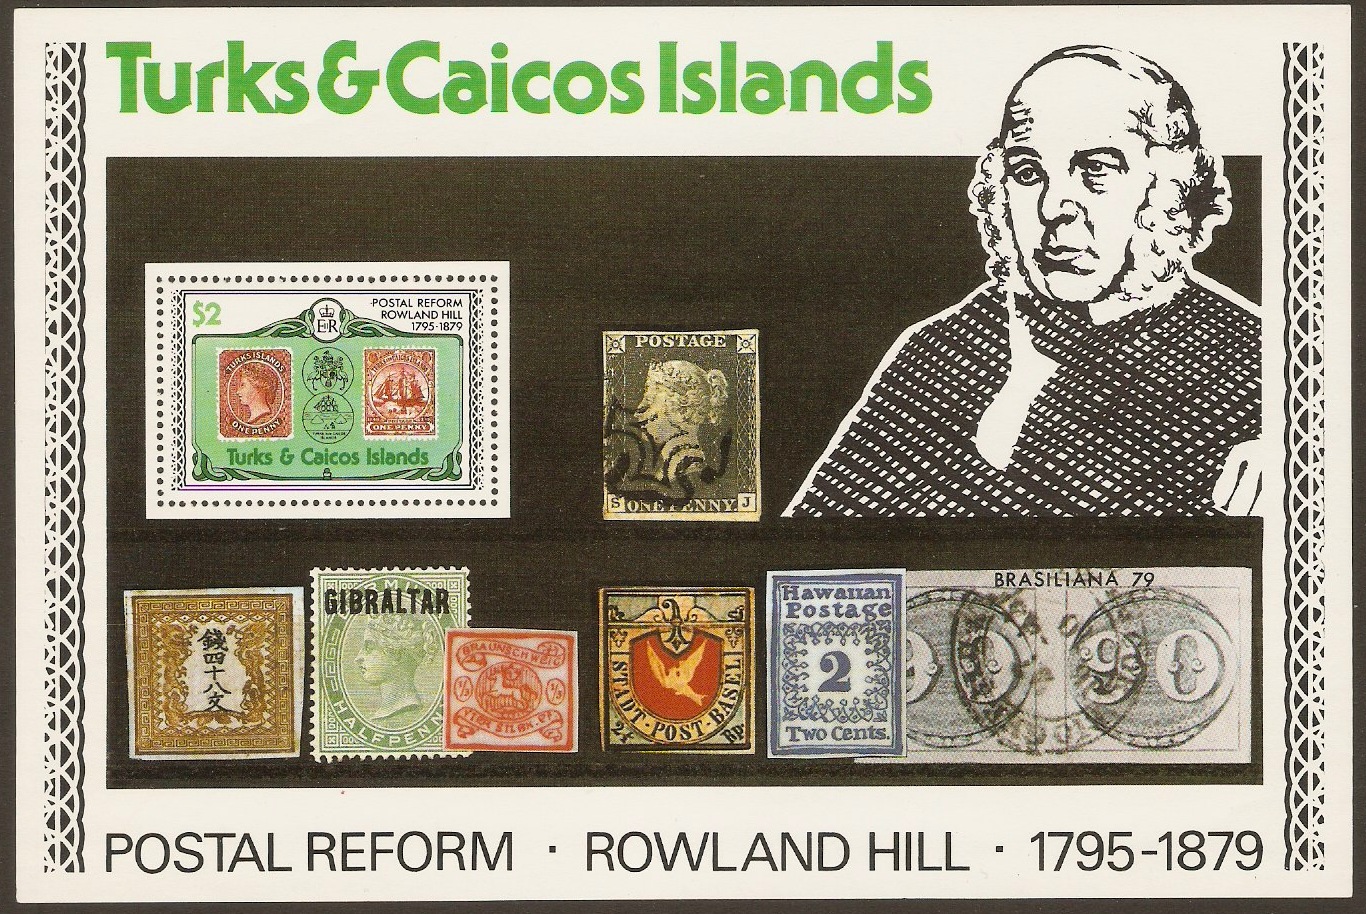 Turks and Caicos 1979 Rowland Hill Anniversary Sheet. SGMS551.